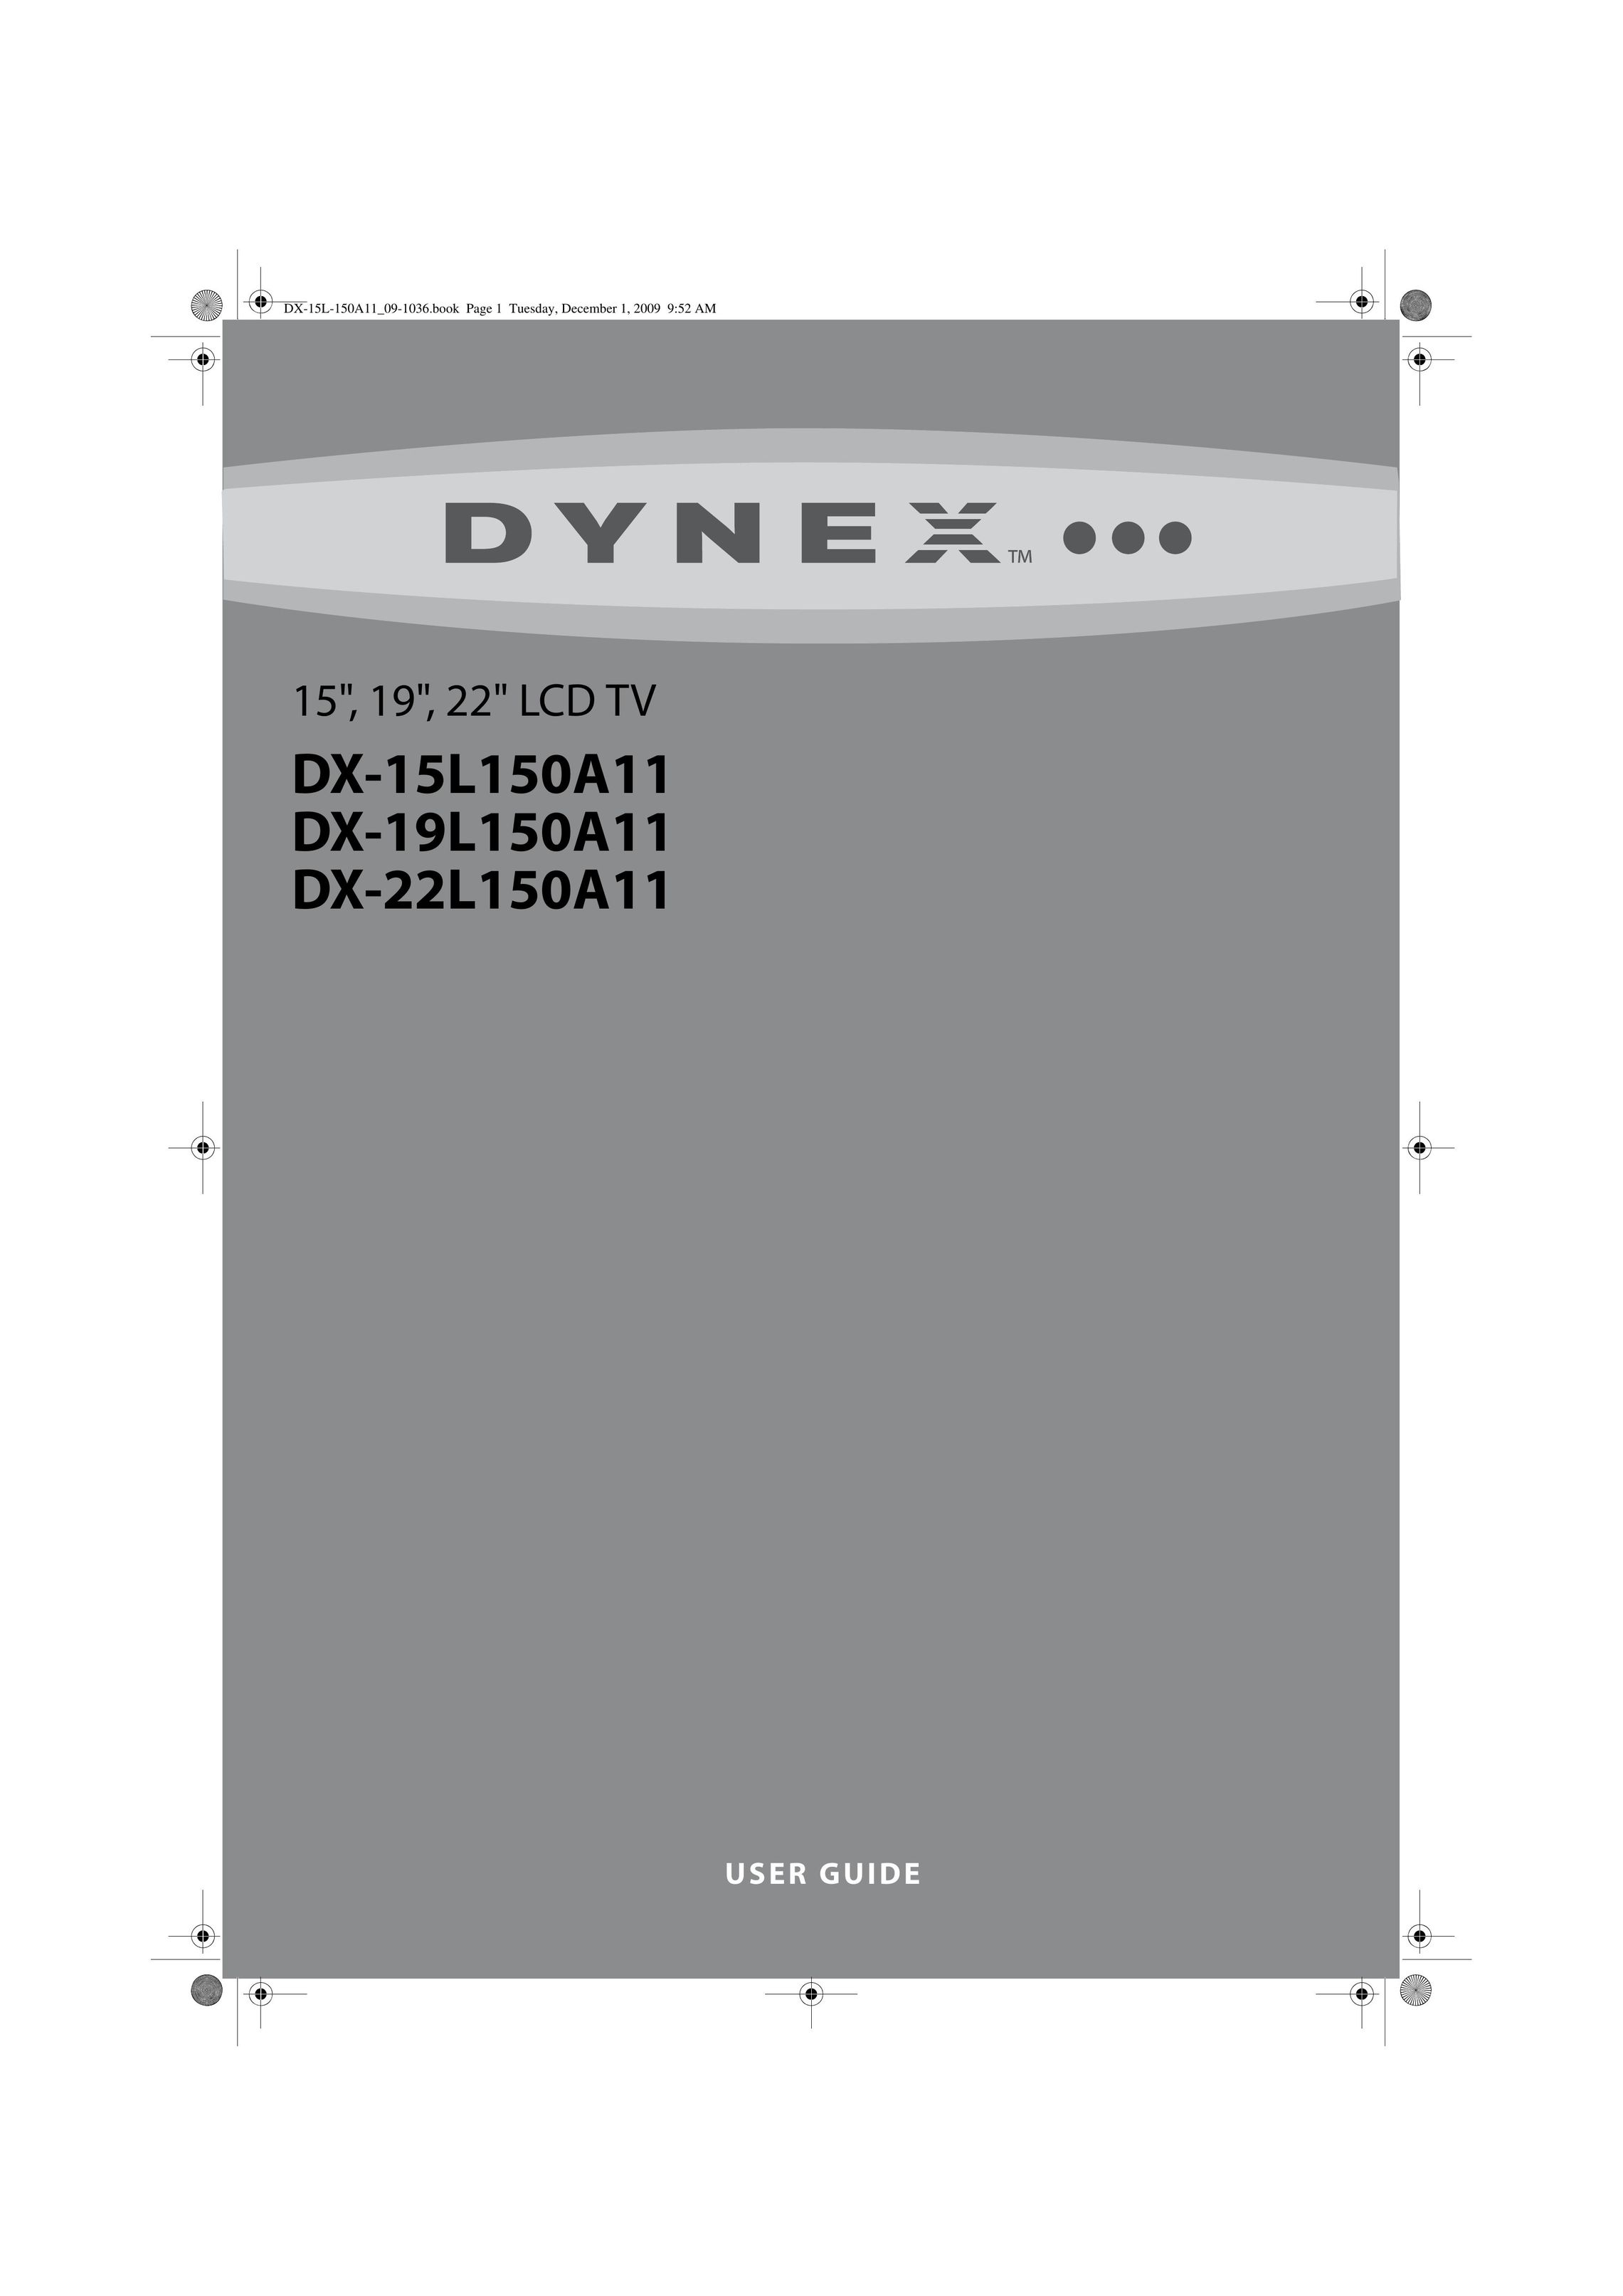 Dynex DX-19L150A11 Flat Panel Television User Manual (Page 1)